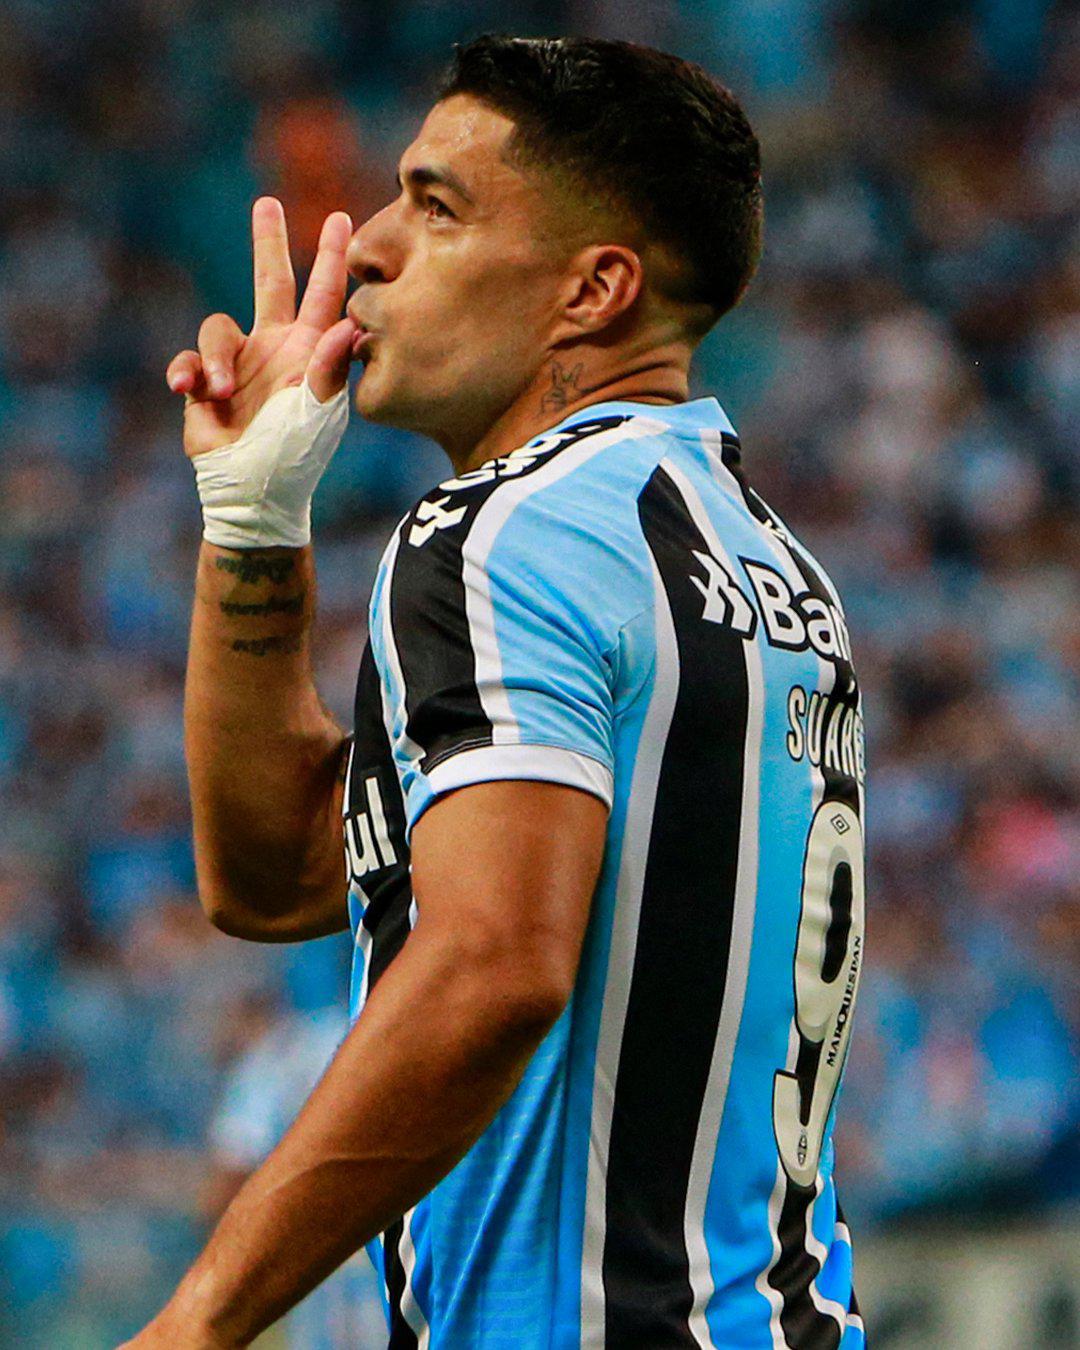 It only took him 38 minutes!  Electrifying hat-trick of Luis Suárez in his debut with the Gremio of Brazil